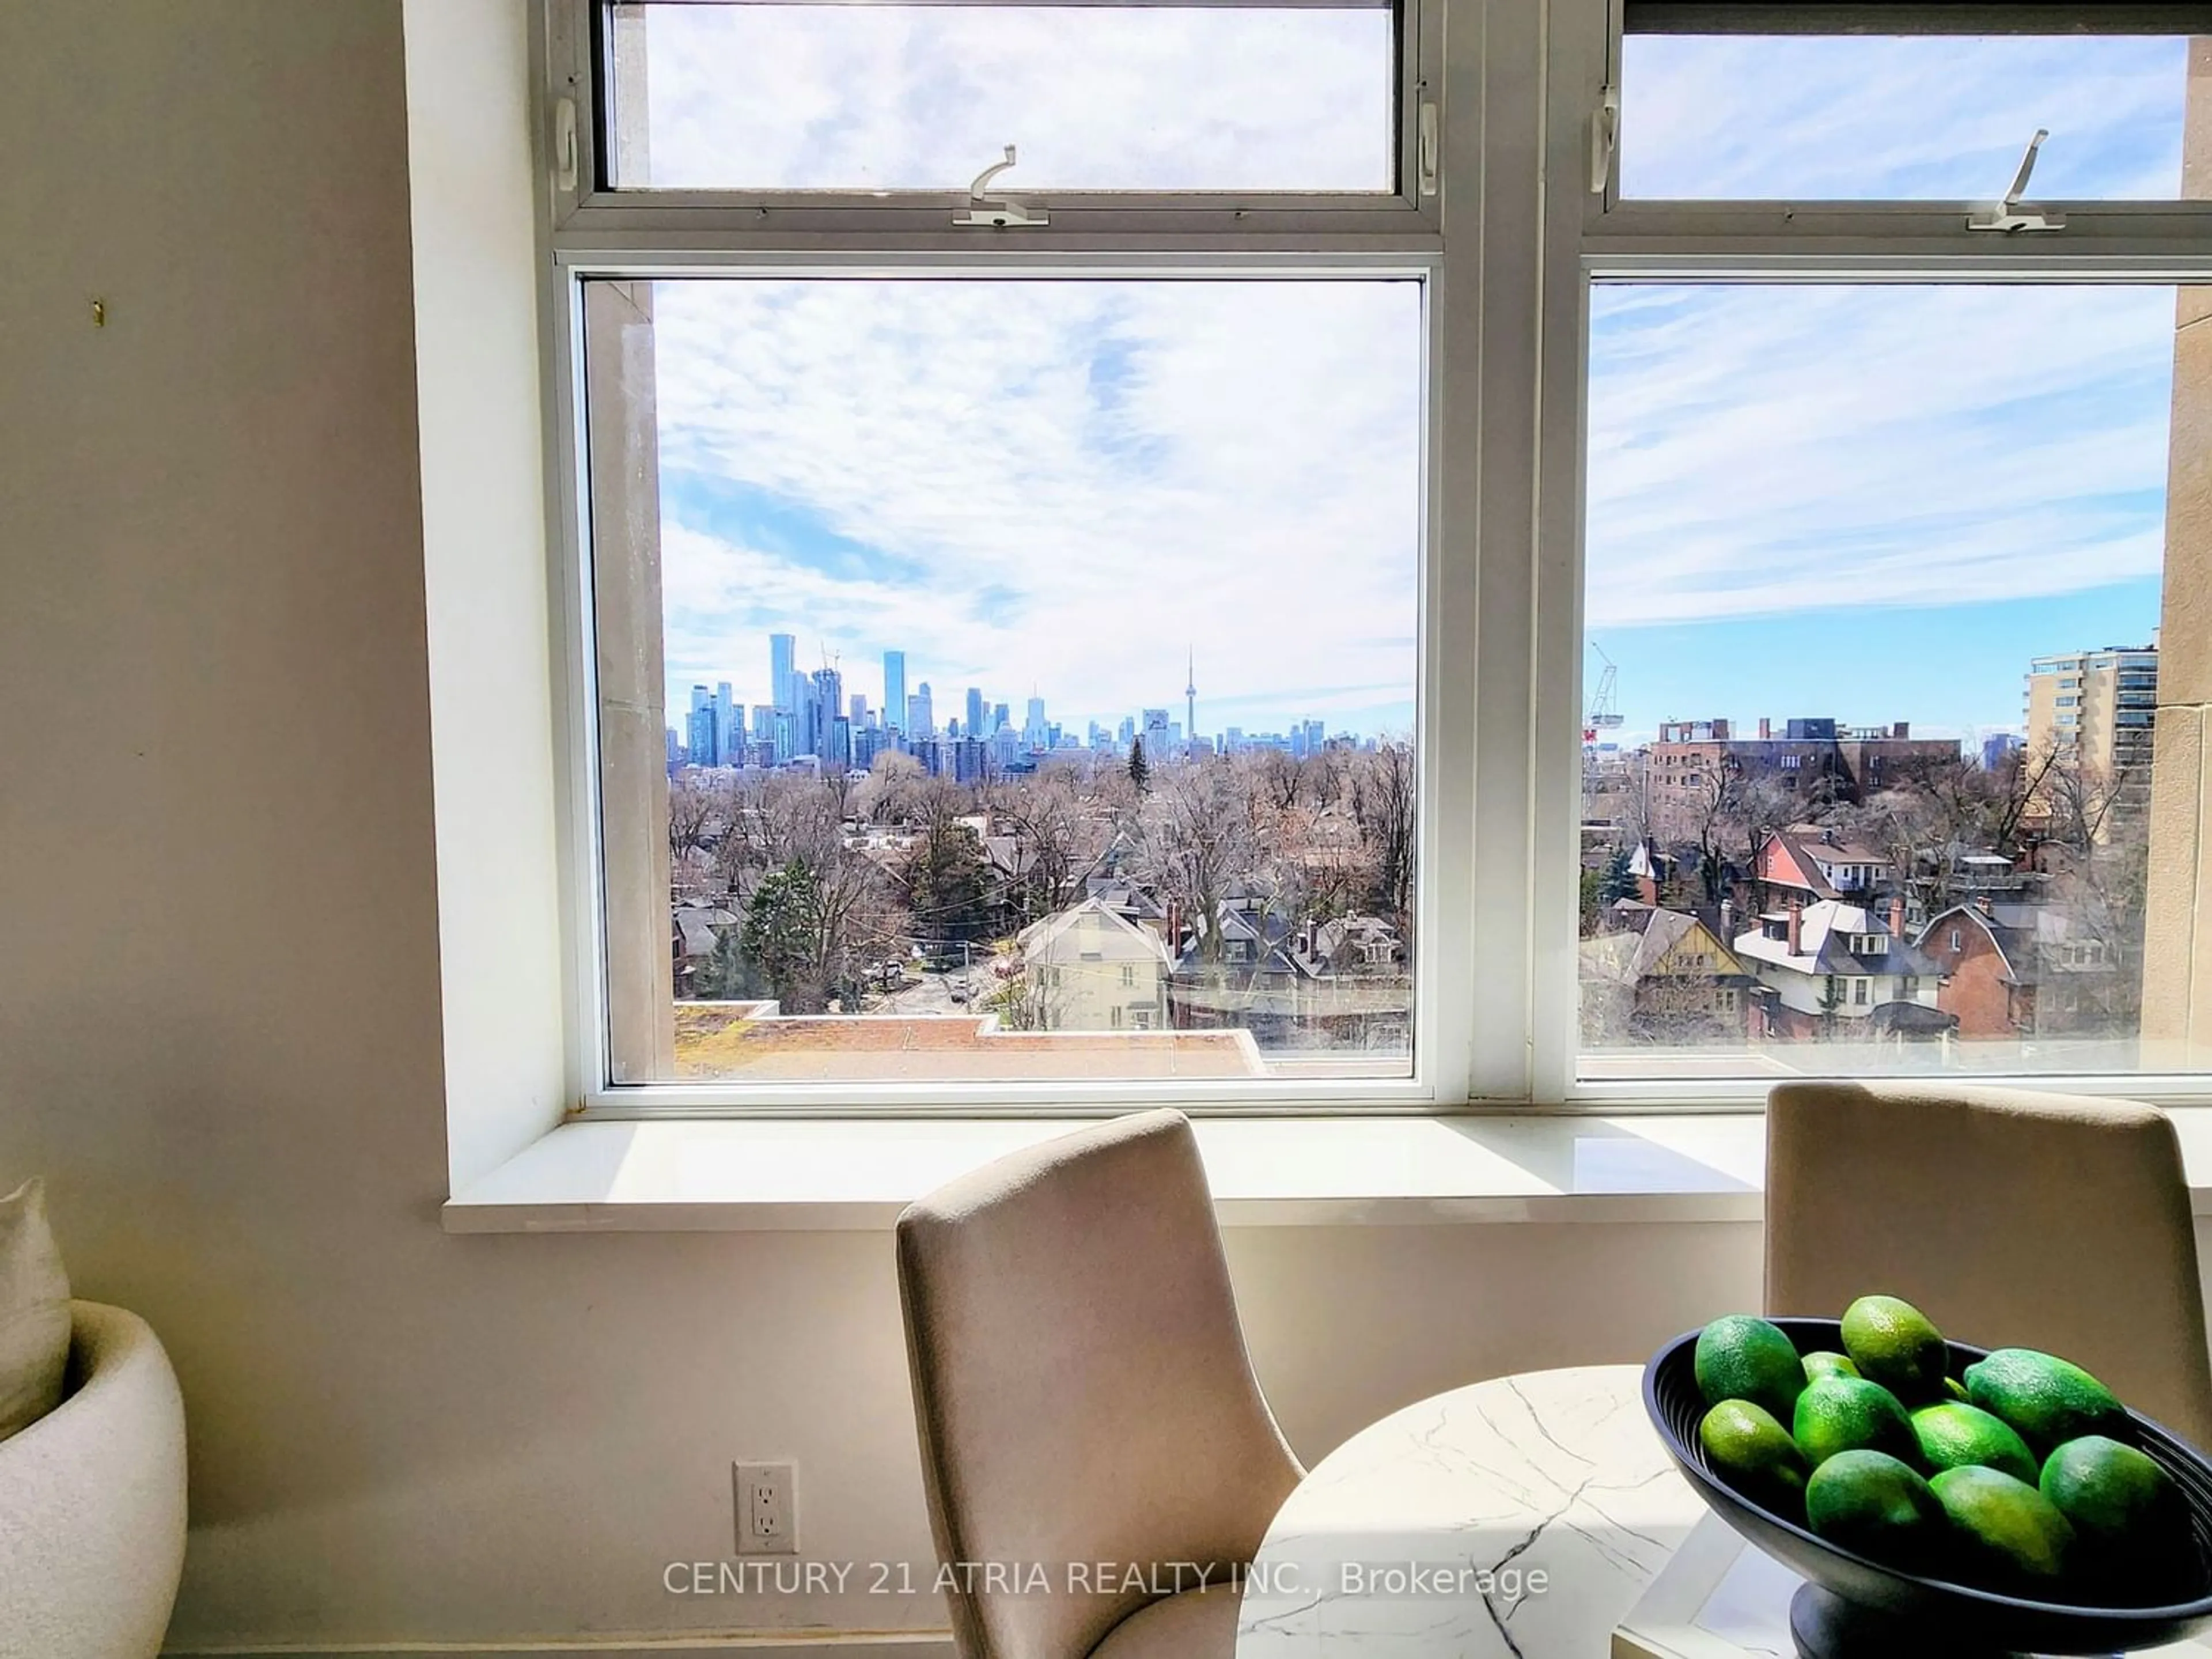 Lakeview for 111 St Clair Ave #616, Toronto Ontario M4V 1N5